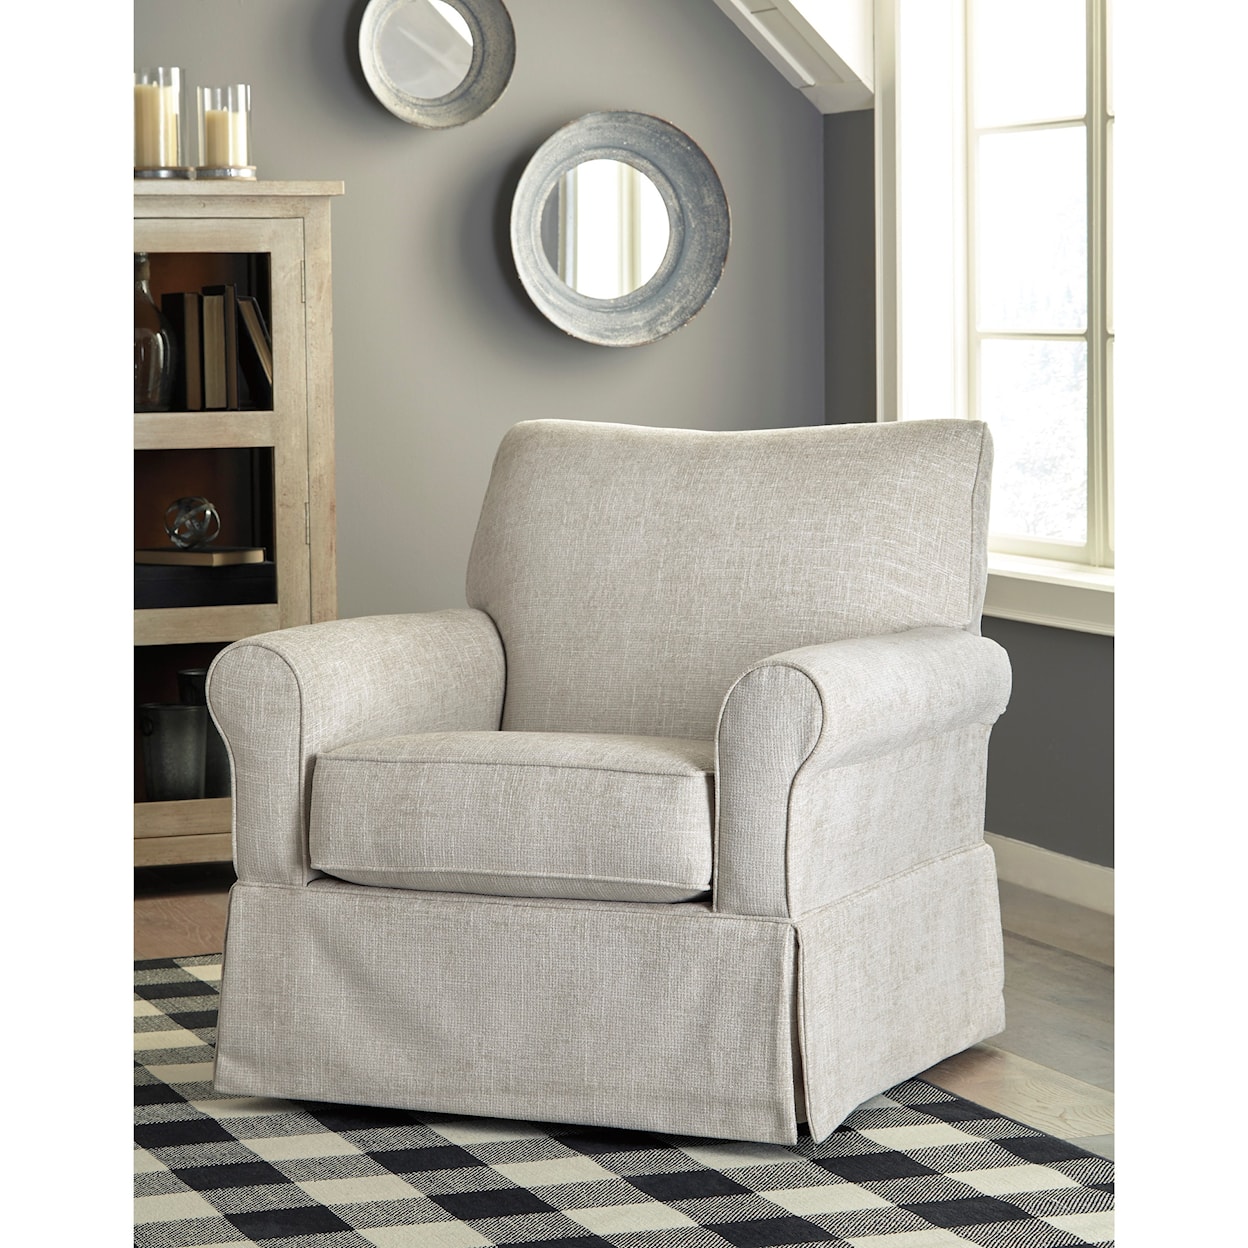 Signature Design by Ashley Searcy Swivel Glider Accent Chair